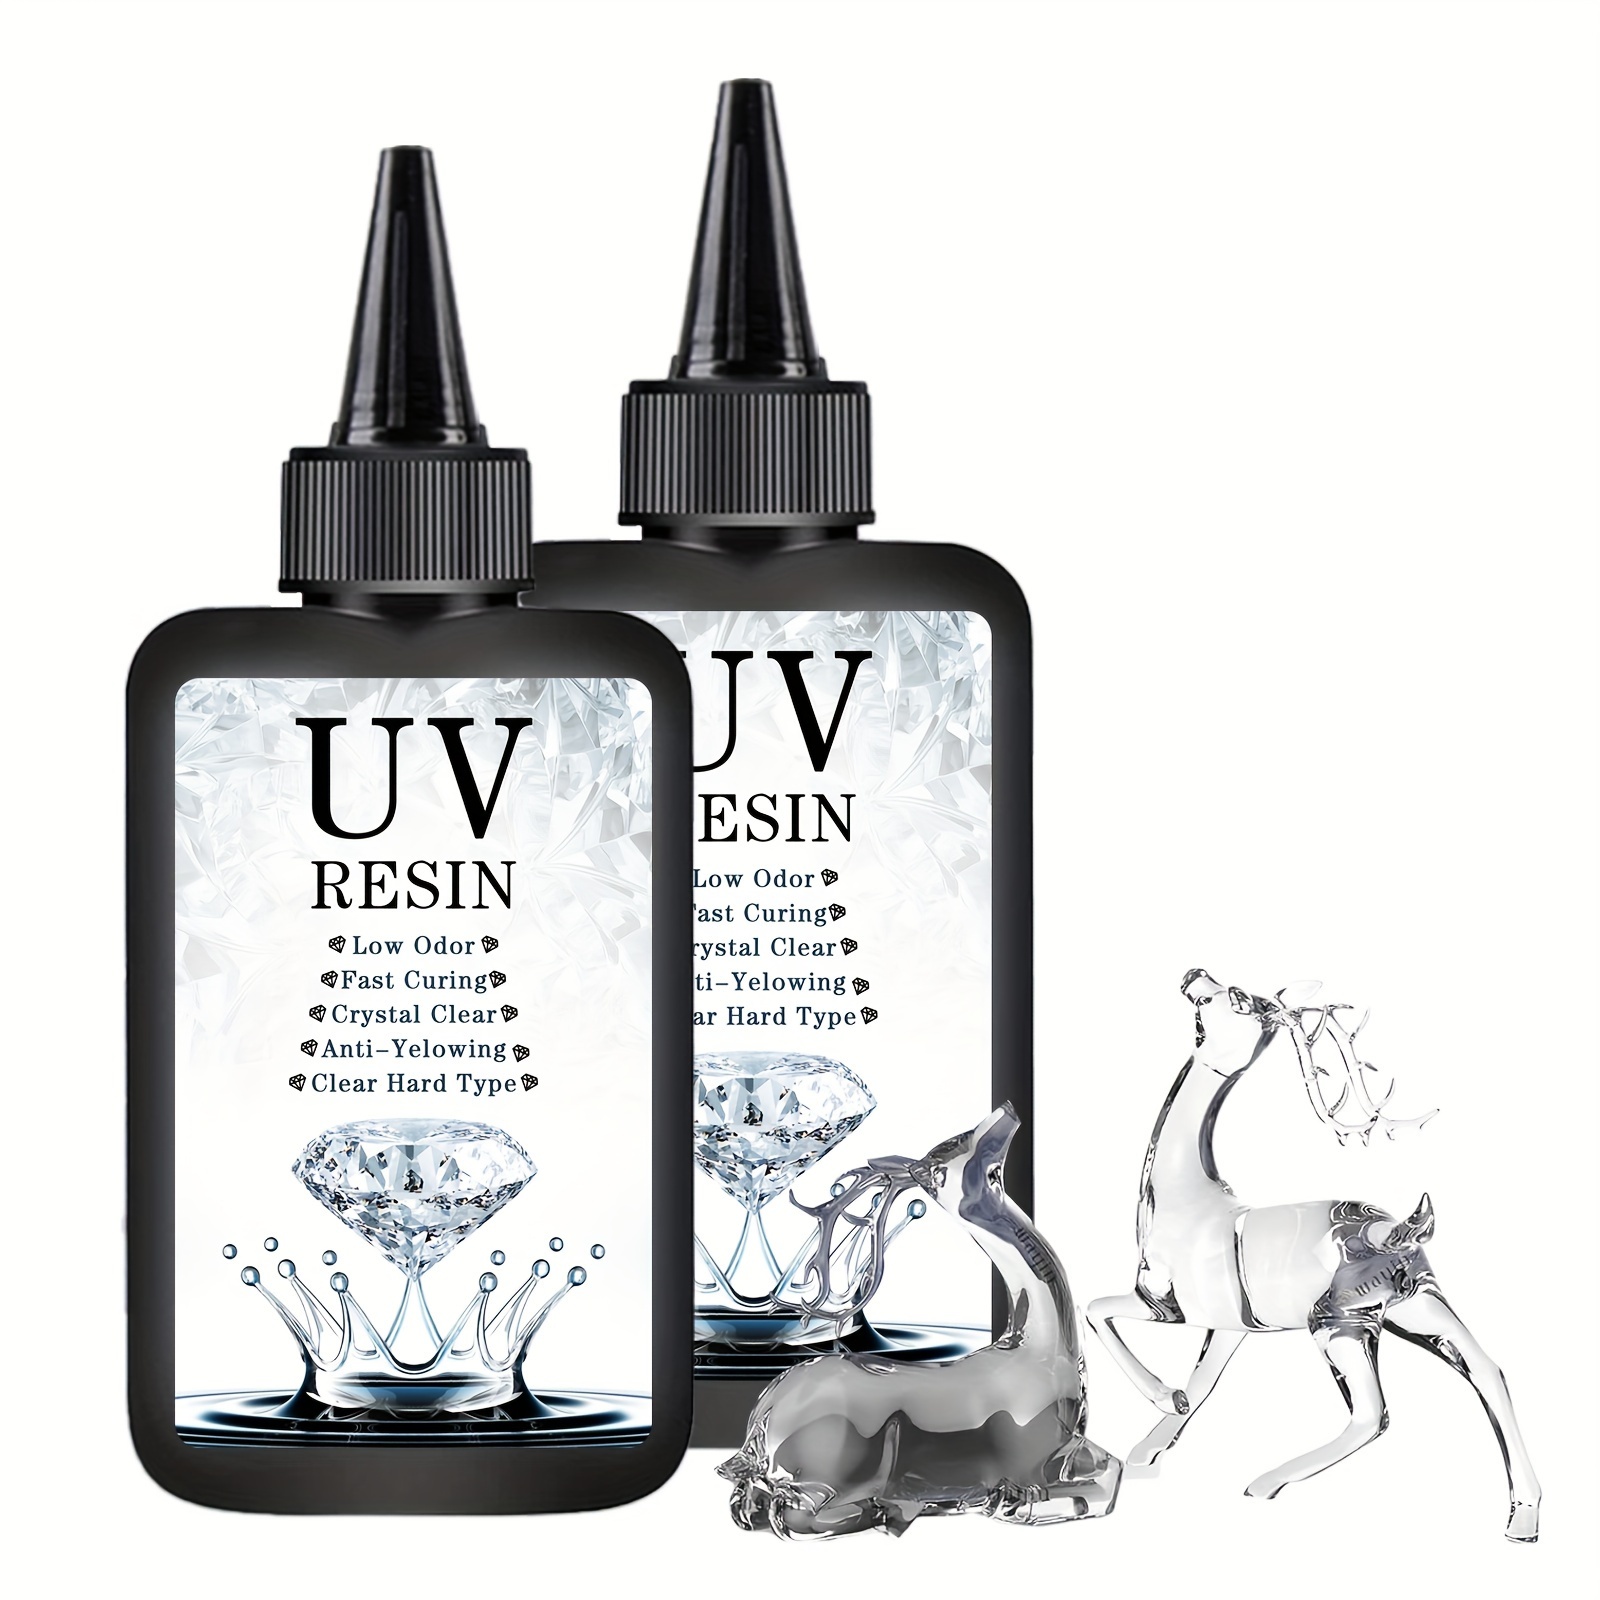 

10g/25g/60g/100g 0.35oz/0.88oz/2.12oz/3.53oz Uv Resin With Light, Upgraded Transparent Uv Curing Resin For Art Craft Jewelry Making